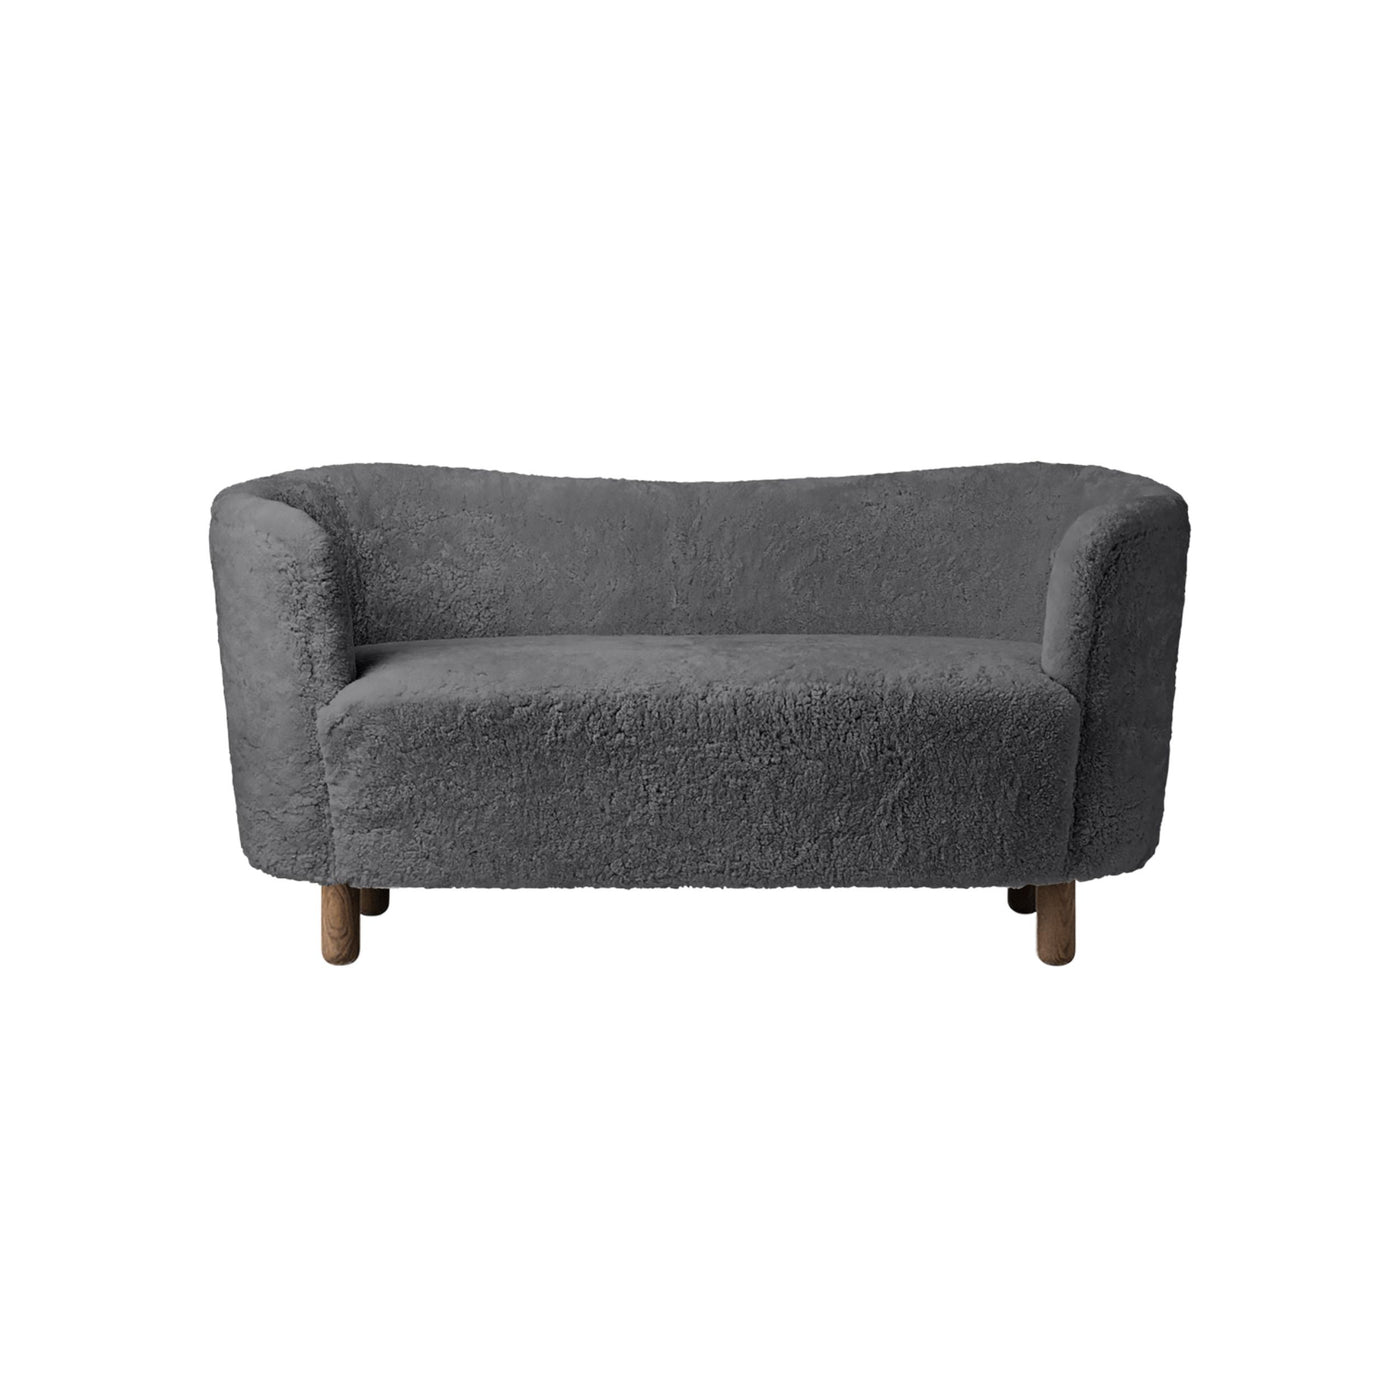 By Lassen Mingle sofa with smoked oak legs. Made to order from someday designs. #colour_sheepskin-anthracite